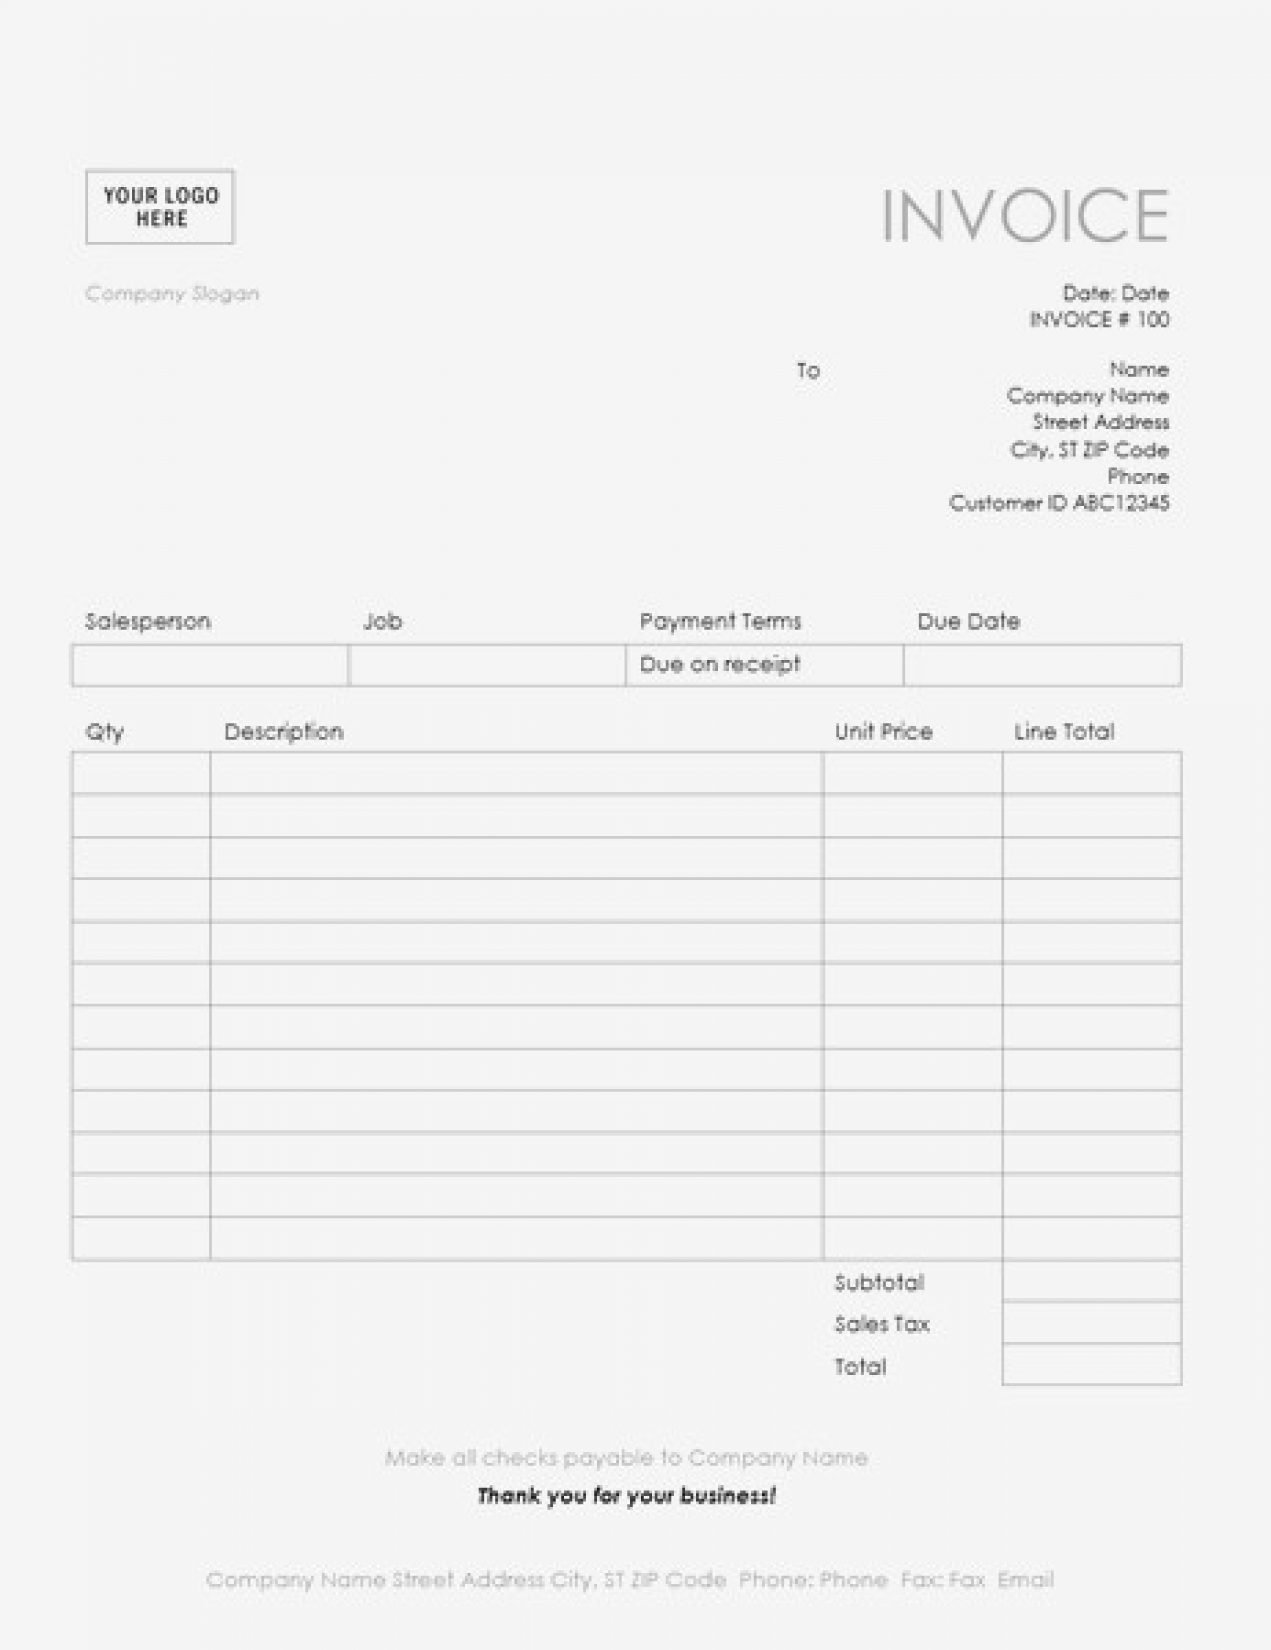 Invoice Template In Excel 2007